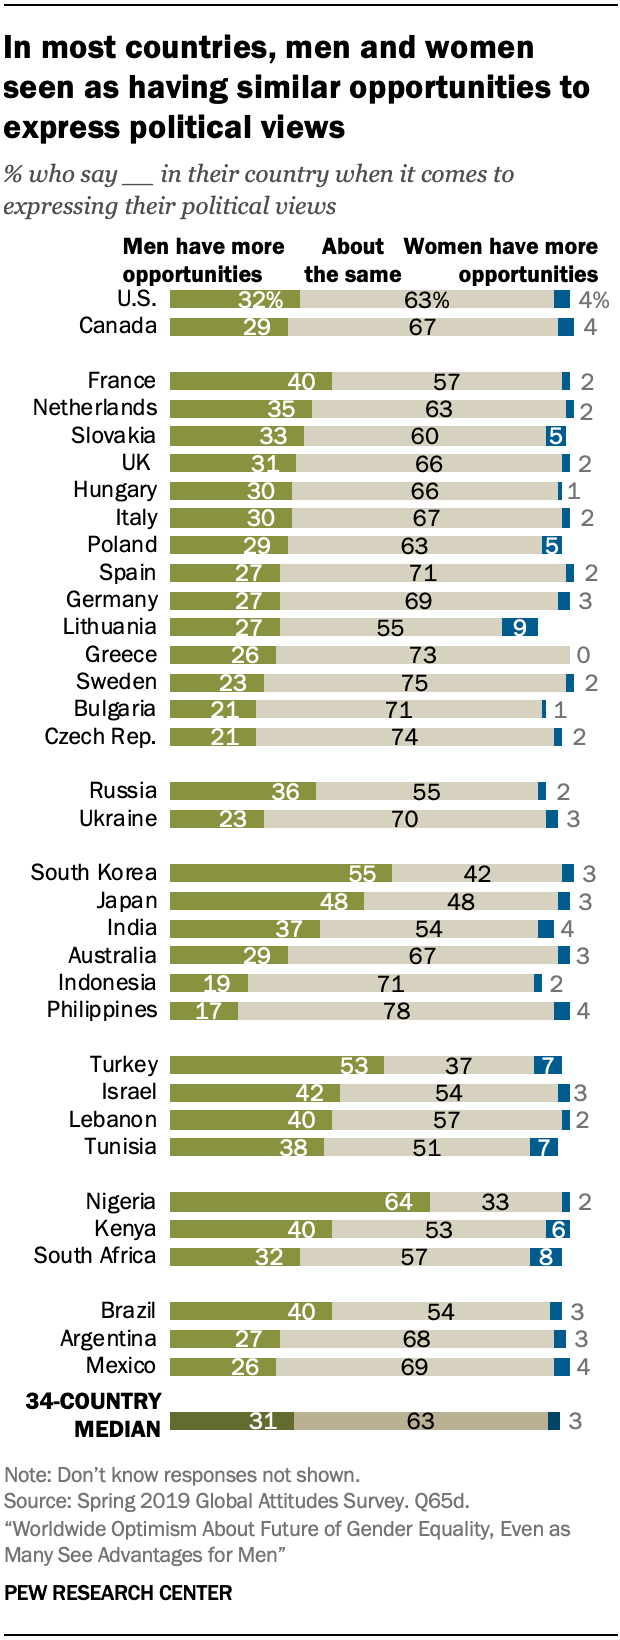 In most countries, men and women seen as having similar opportunities to express political views